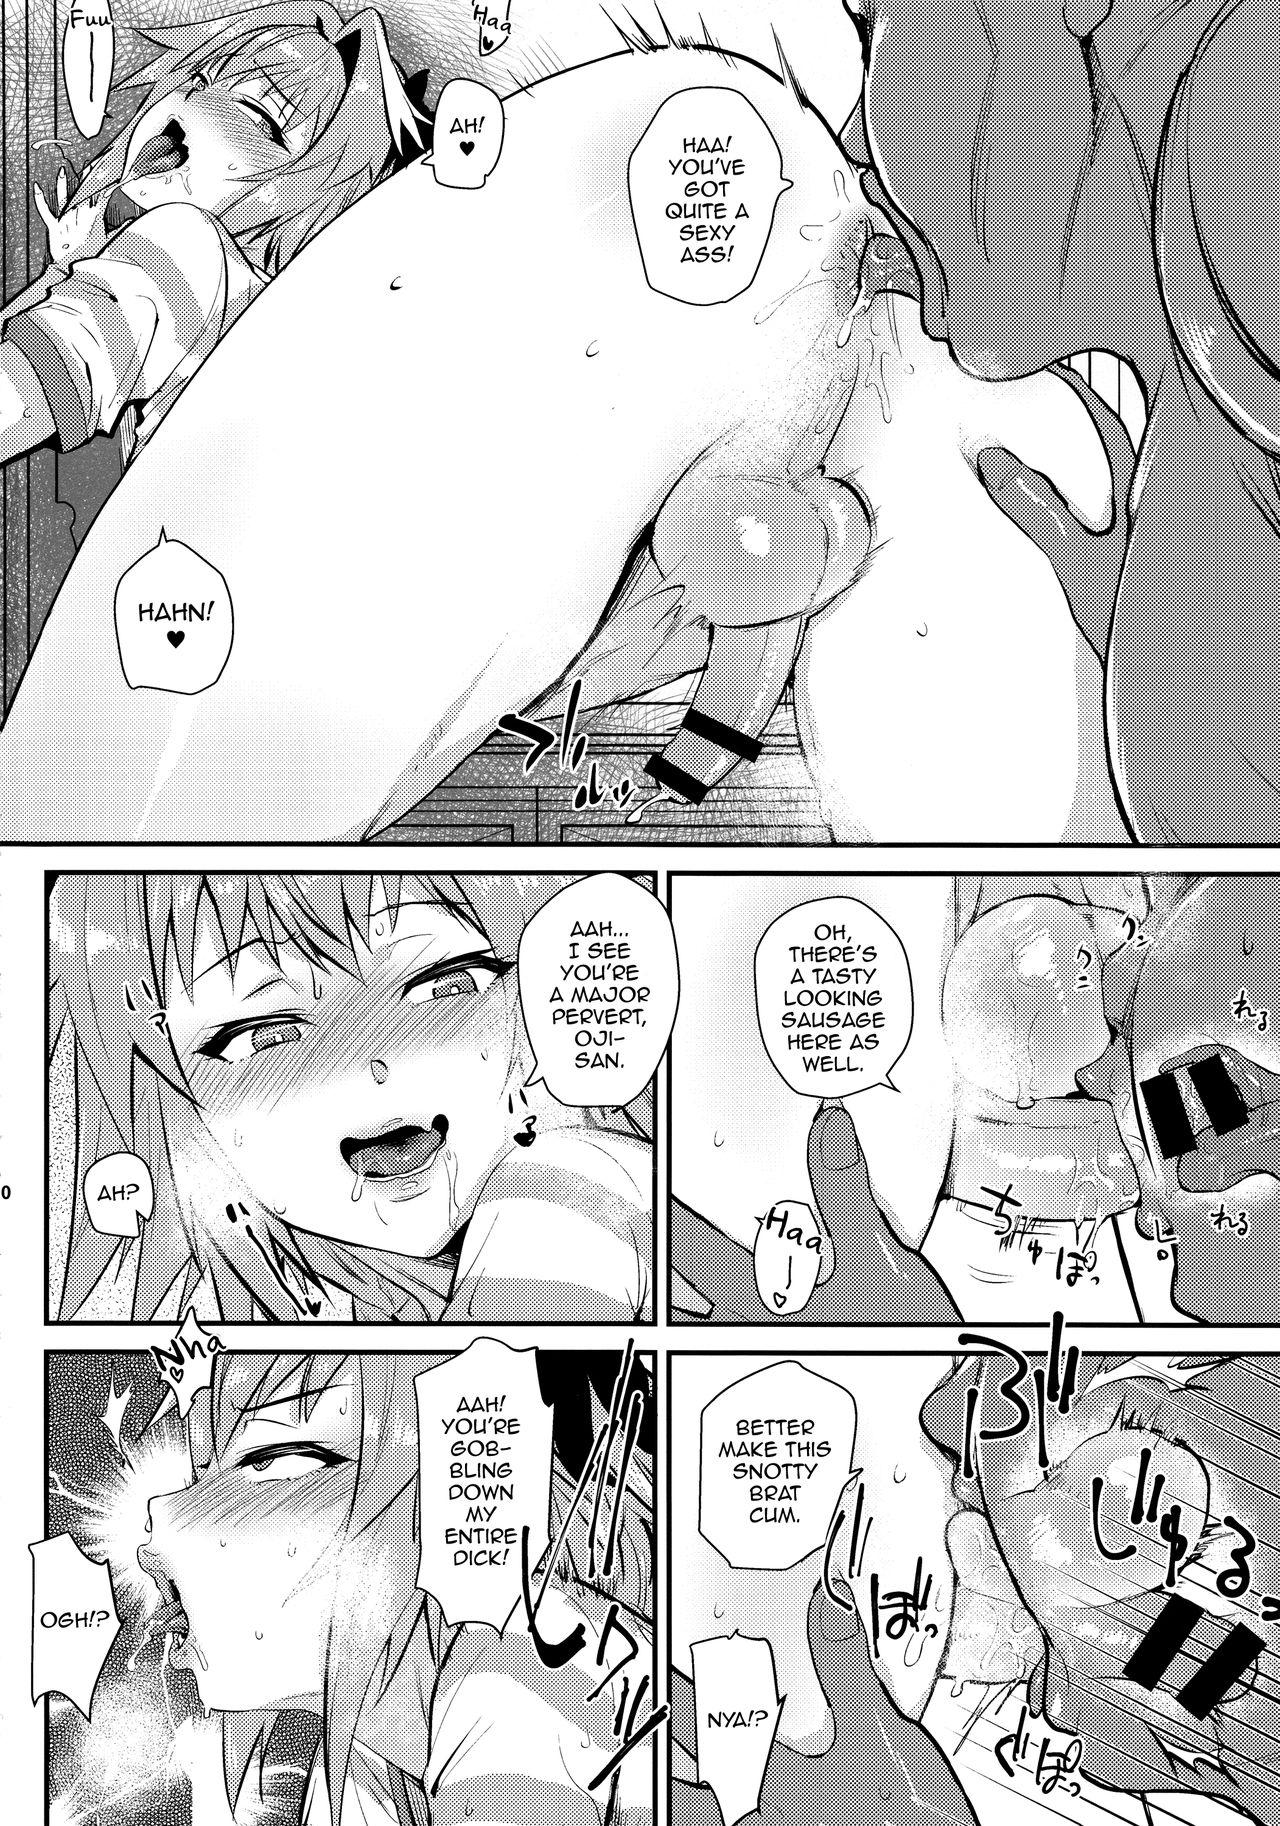 Passionate 5000 Chou QP Hoshii! - Fate grand order Lovers - Page 11